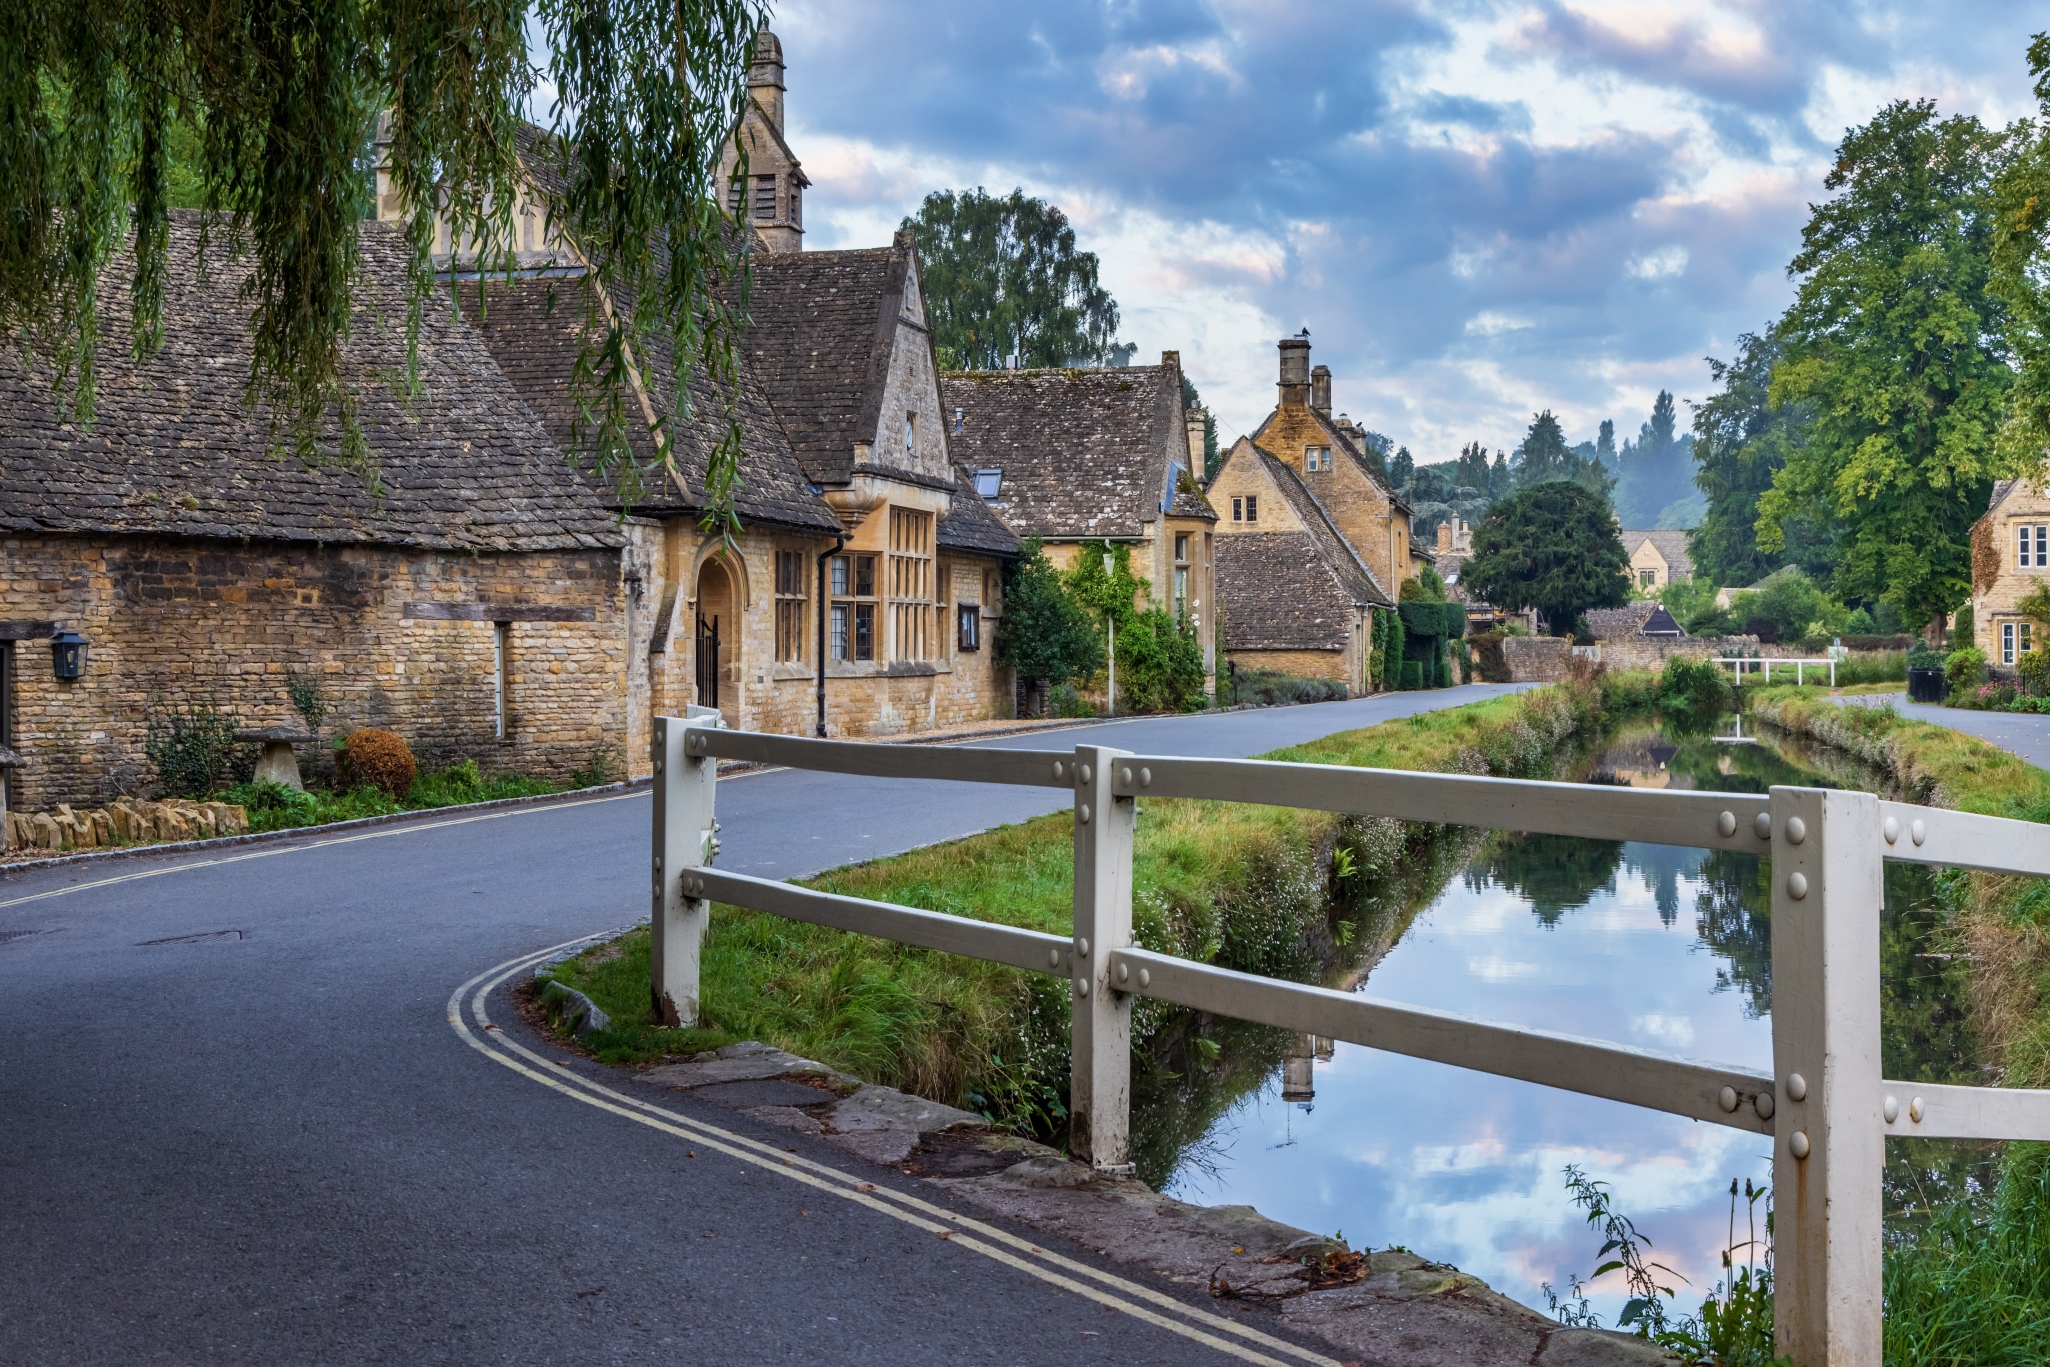 Traditional Cotswolds limestone cottages